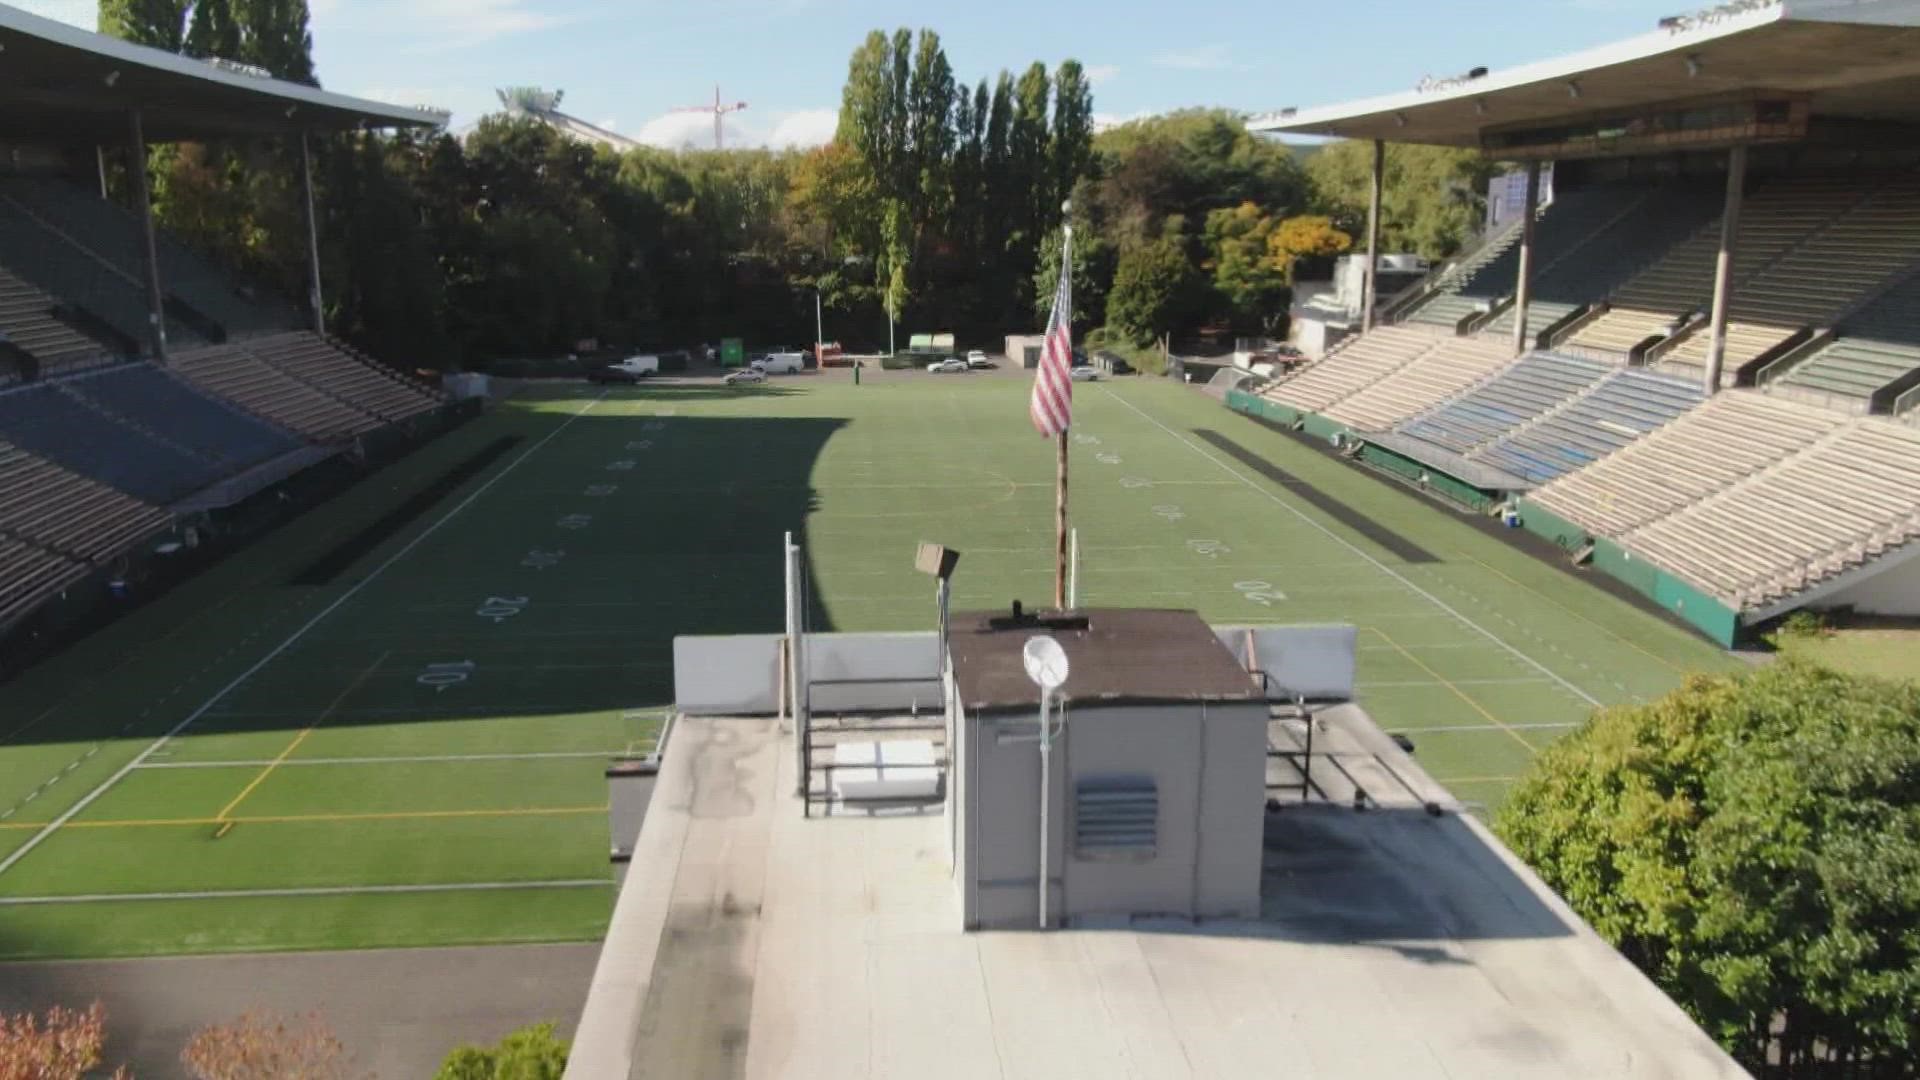 The City of Seattle and Seattle Public Schools announced a new partnership to build a new Memorial Stadium at the Seattle Center.